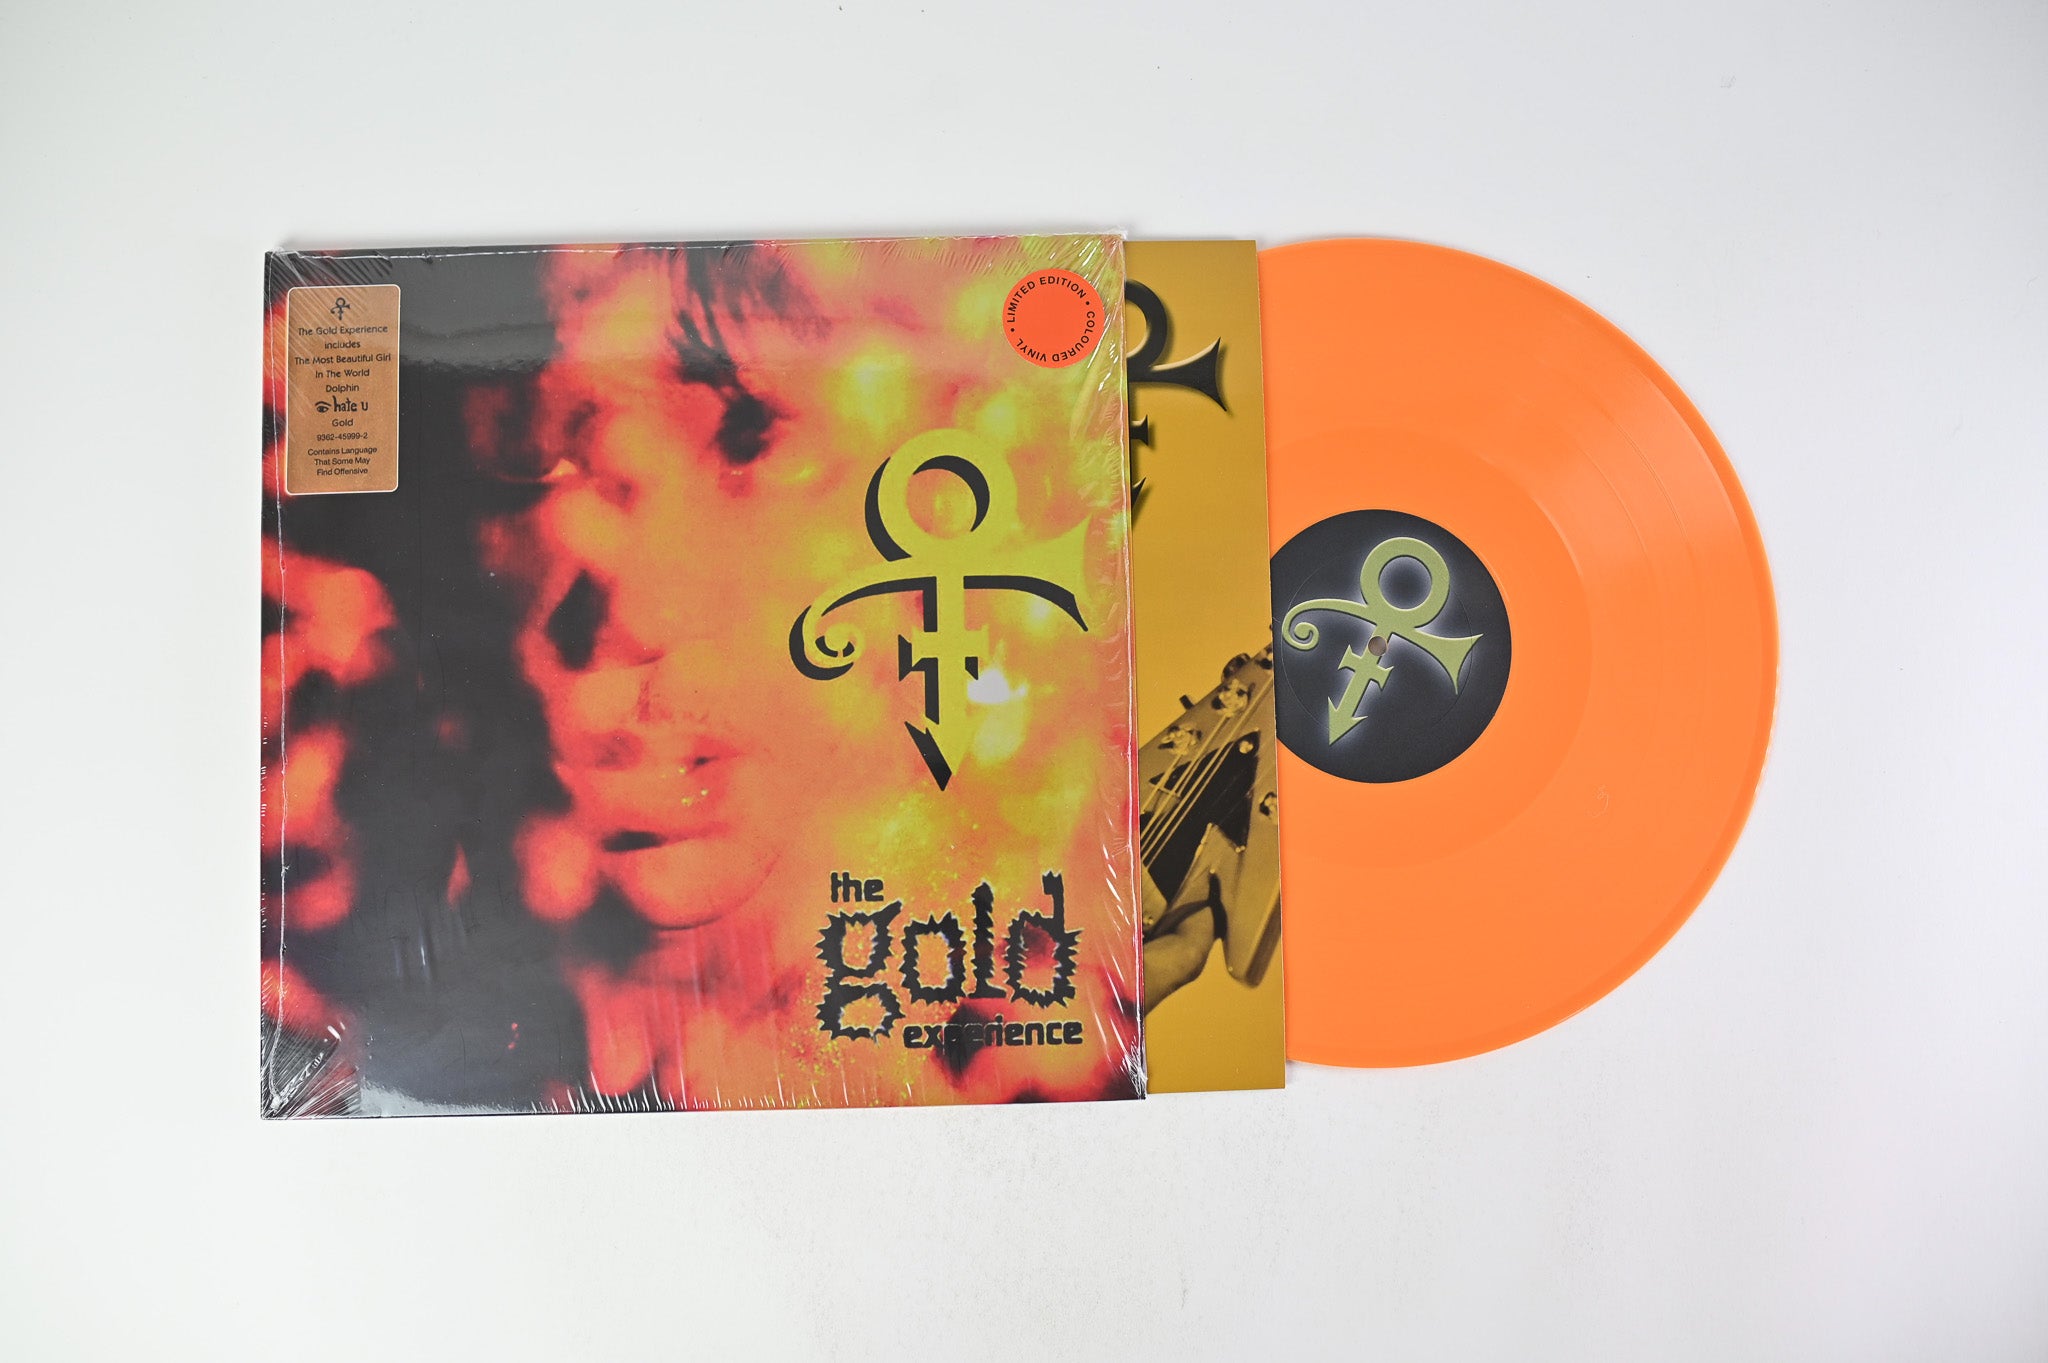 The Artist (Formerly Known As Prince) - The Gold Experience Unofficial Orange Vinyl